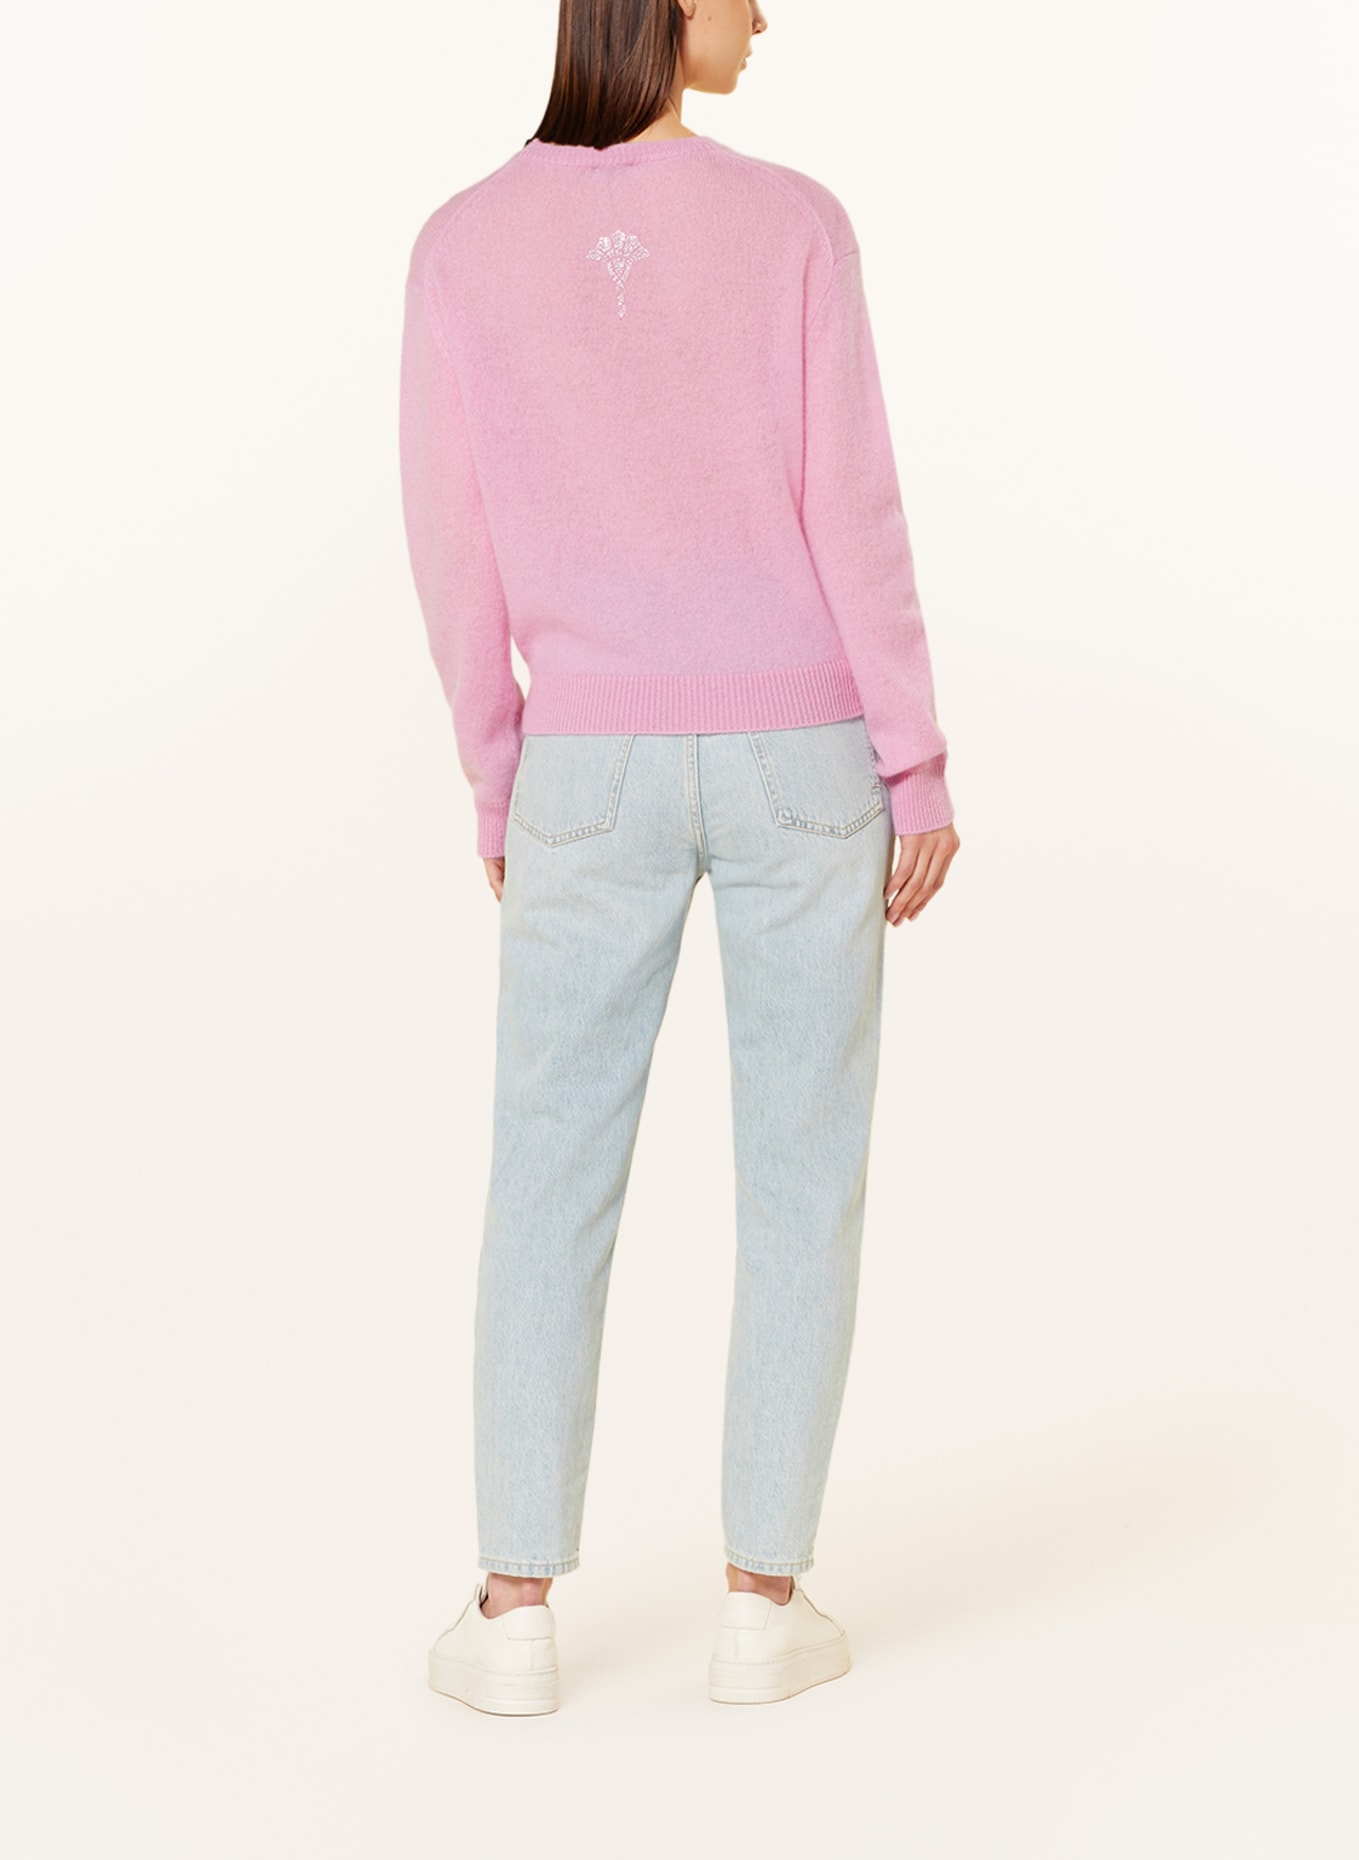 JOOP! Cashmere sweater with decorative gems, Color: PINK (Image 3)